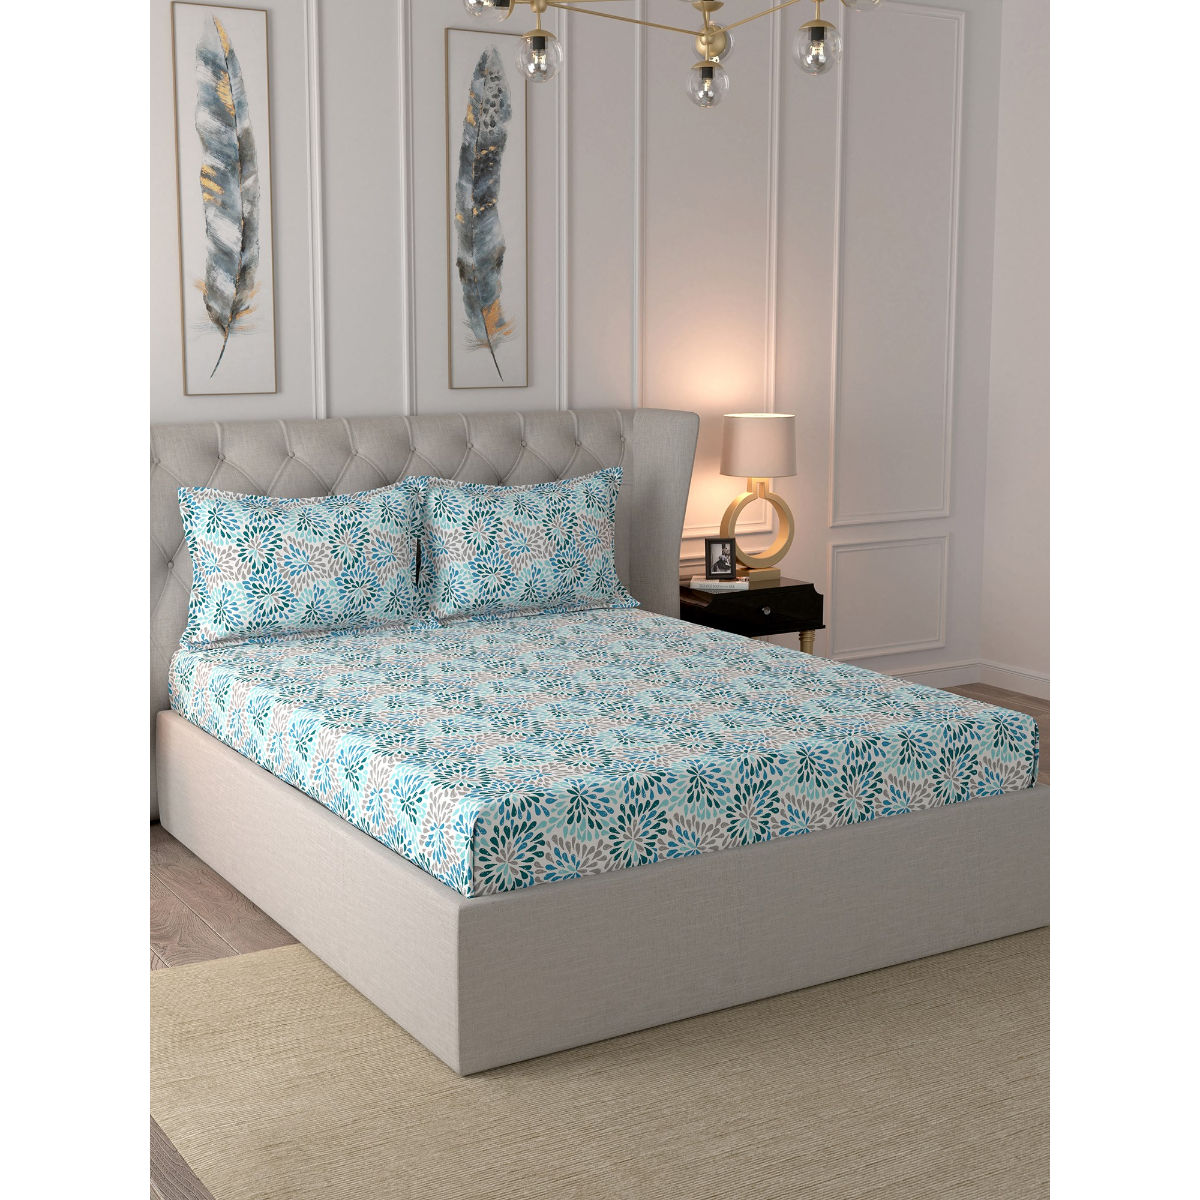 Inhouse by Maspar Glam Laura Blue Print 144TC Cotton King Bed Sheet With 2 Pillow Covers